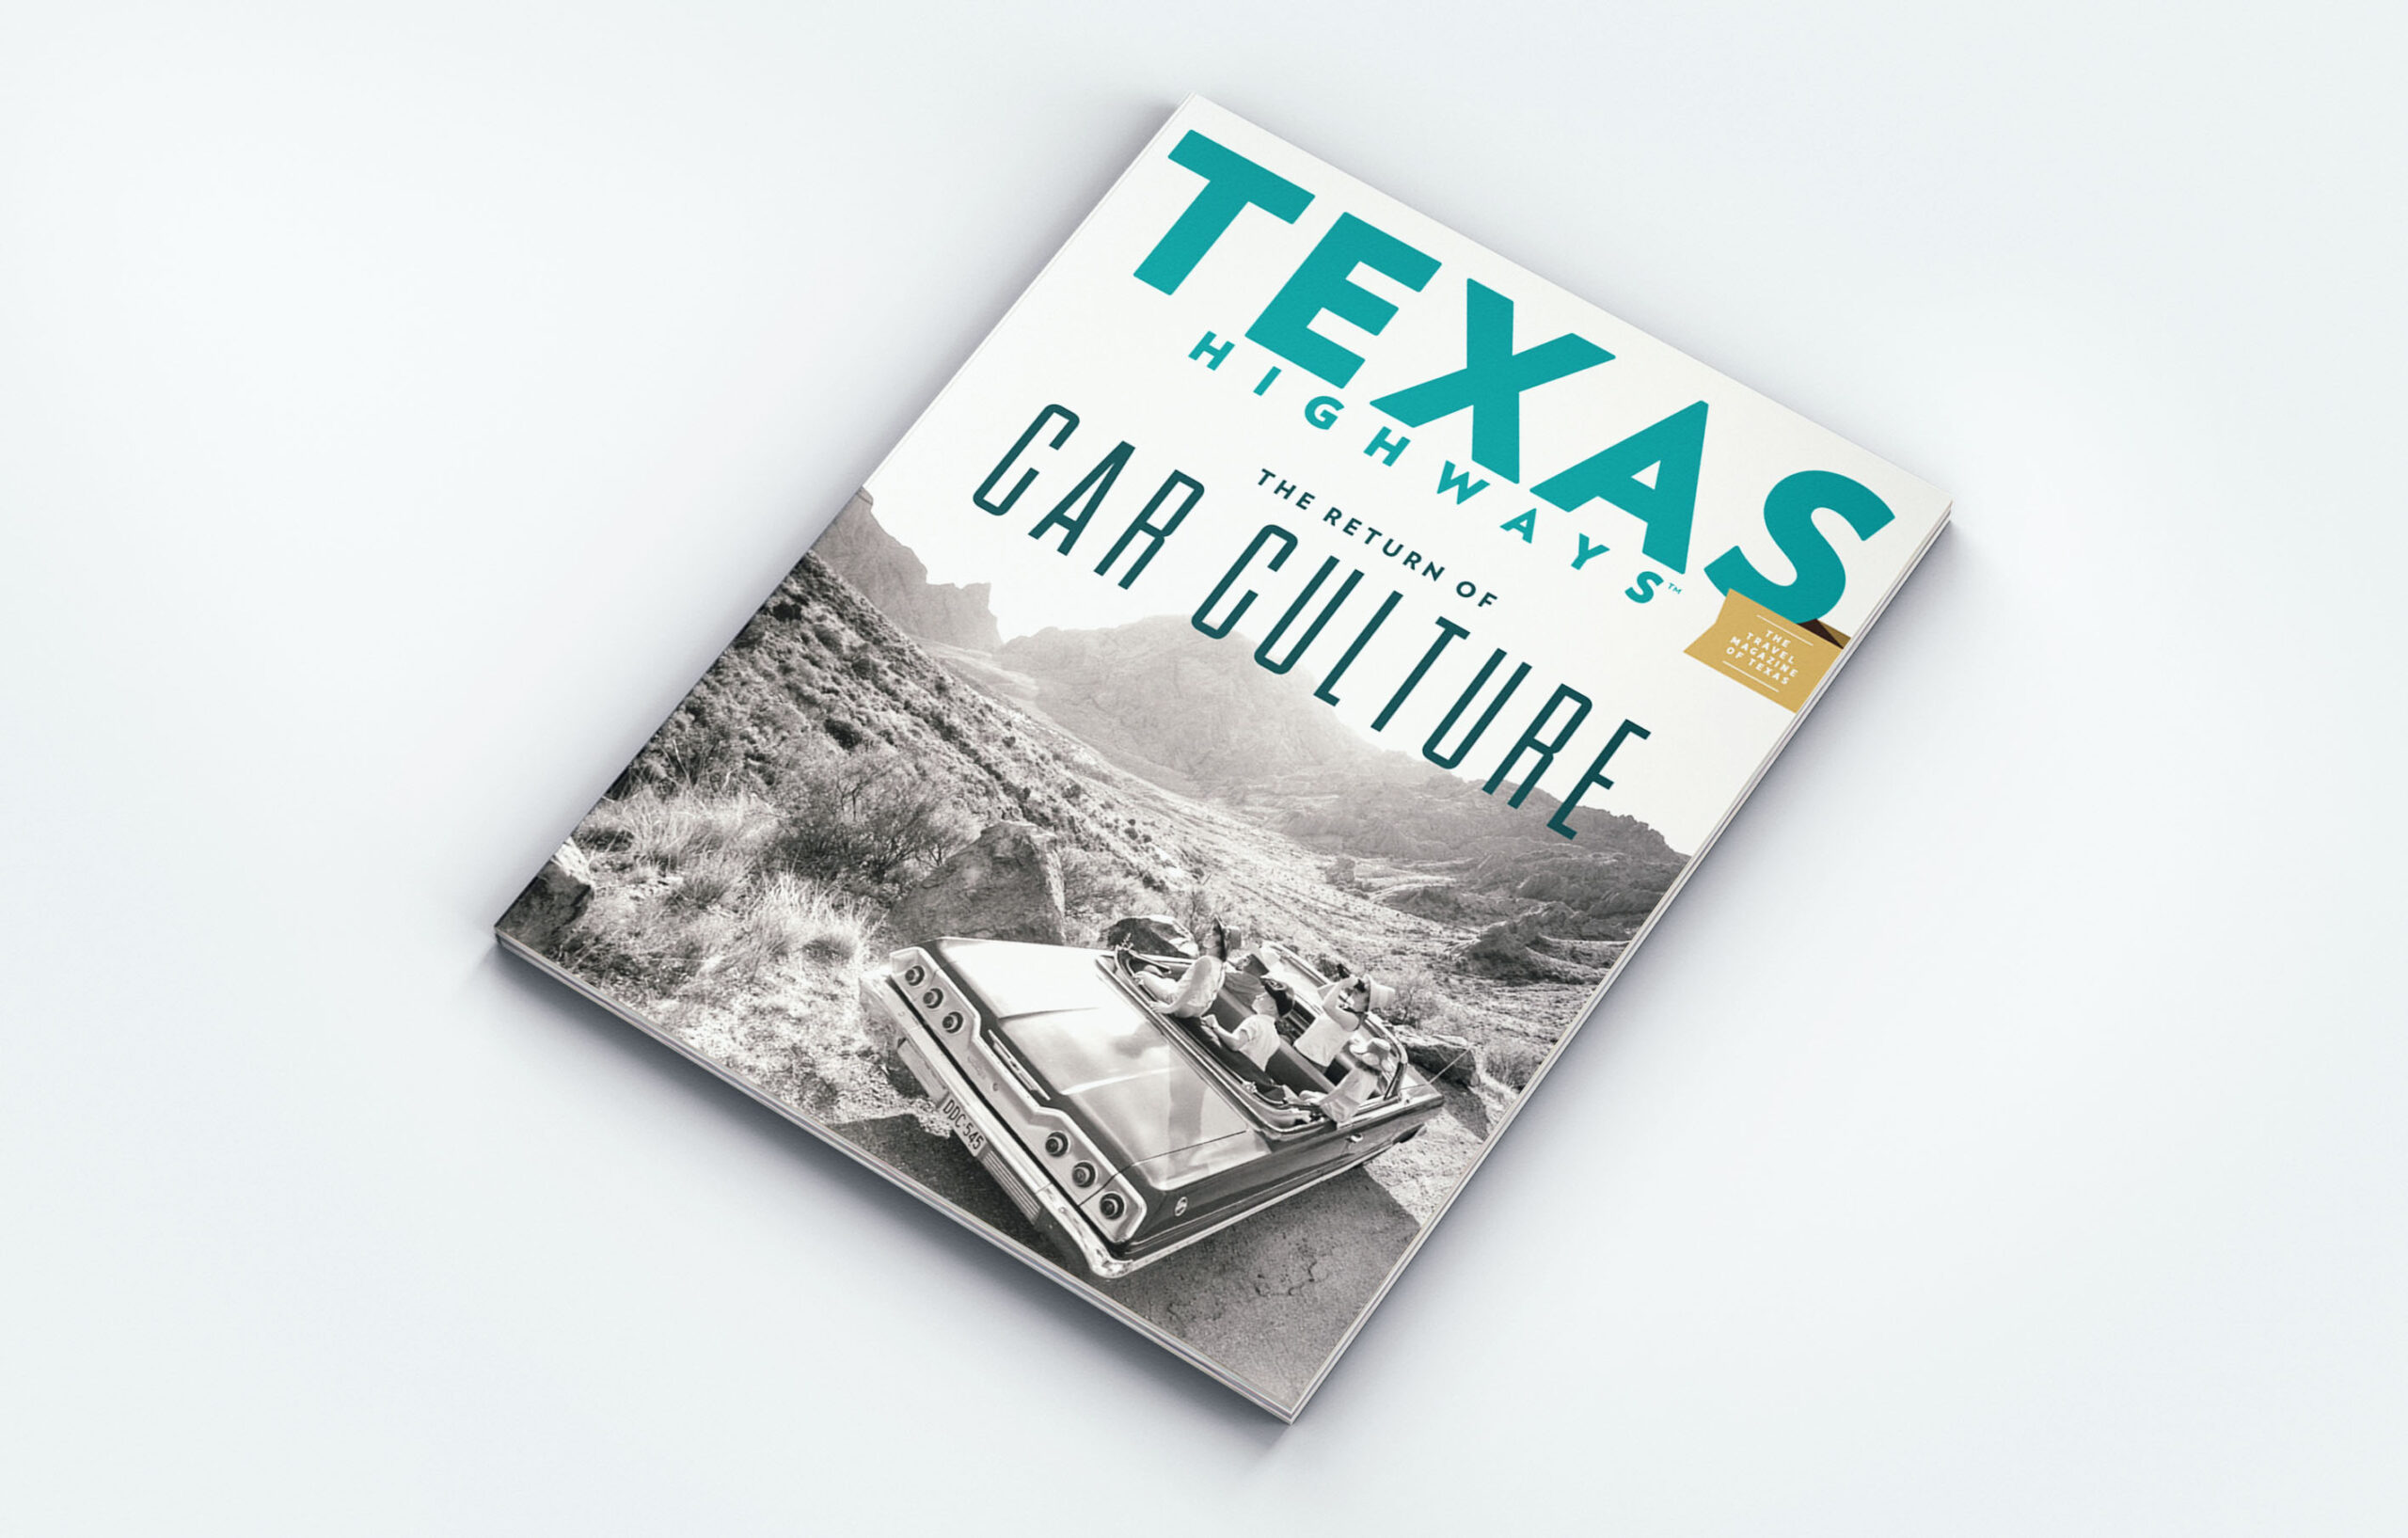 The cover of Texas Highways' February 2021 issue, "The Return of Car Culture" showing teal type reading "Texas Highways" and a black and white picture of a family pulled to the side of the road